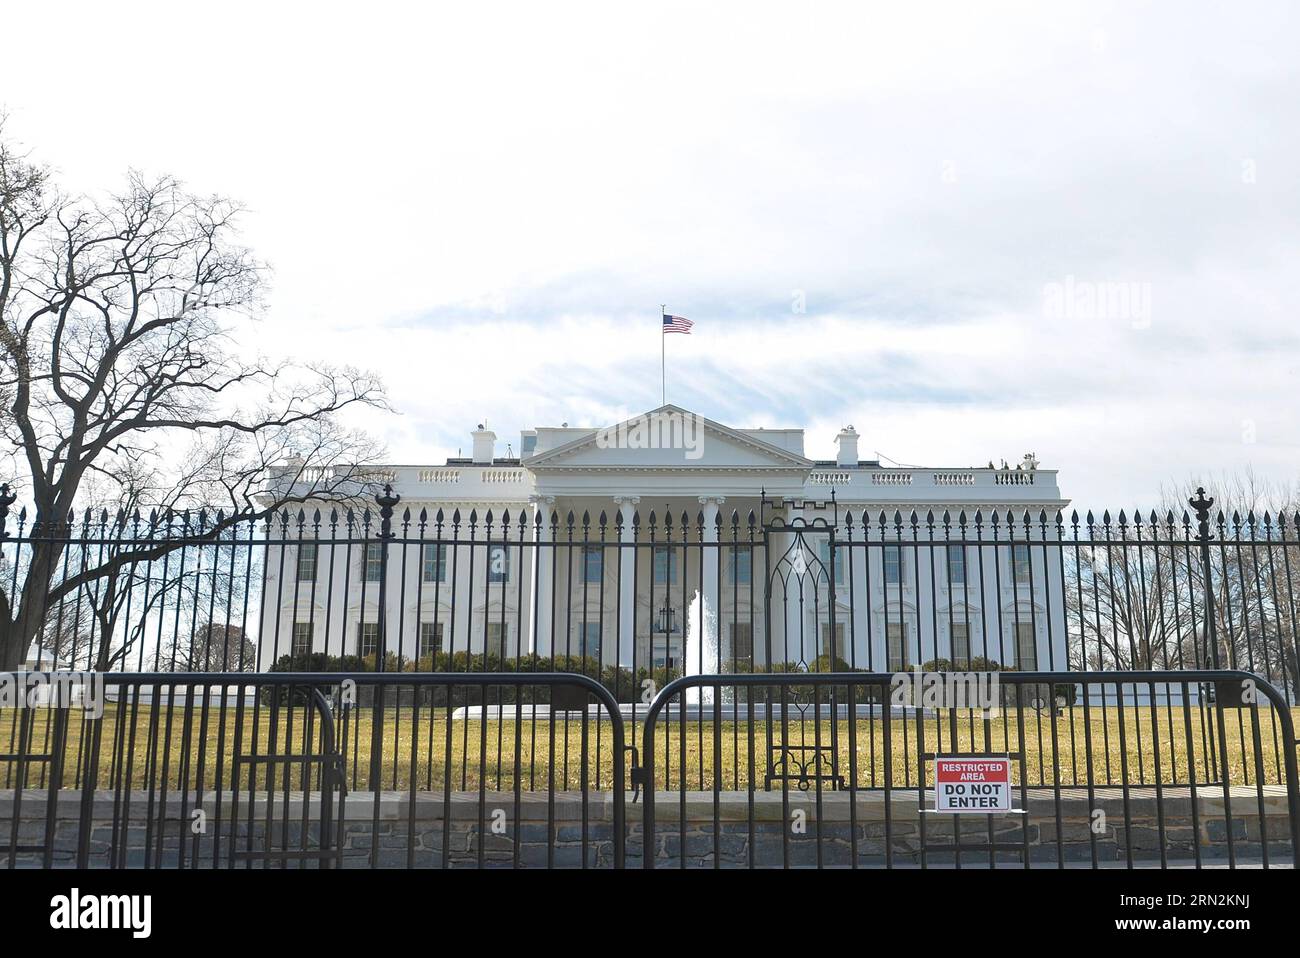 (150313) -- WASHINGTON D.C., March 13, 2015 -- Photo taken on March 13, 2015 shows the fence with Do Not Enter signs around the White House in Washington D.C., capital of the United States. For a U.S. federal agency with a name that suggests secrecy, putting itself repeatedly in the limelight for negative news coverage is quite a bitter irony. The Secret Service, widely perceived as the most elite law enforcement team in the United States that protects the U.S. president and the First Family, landed itself in hot water again after U.S. media revealed earlier this week that two top Secret Servi Stock Photo